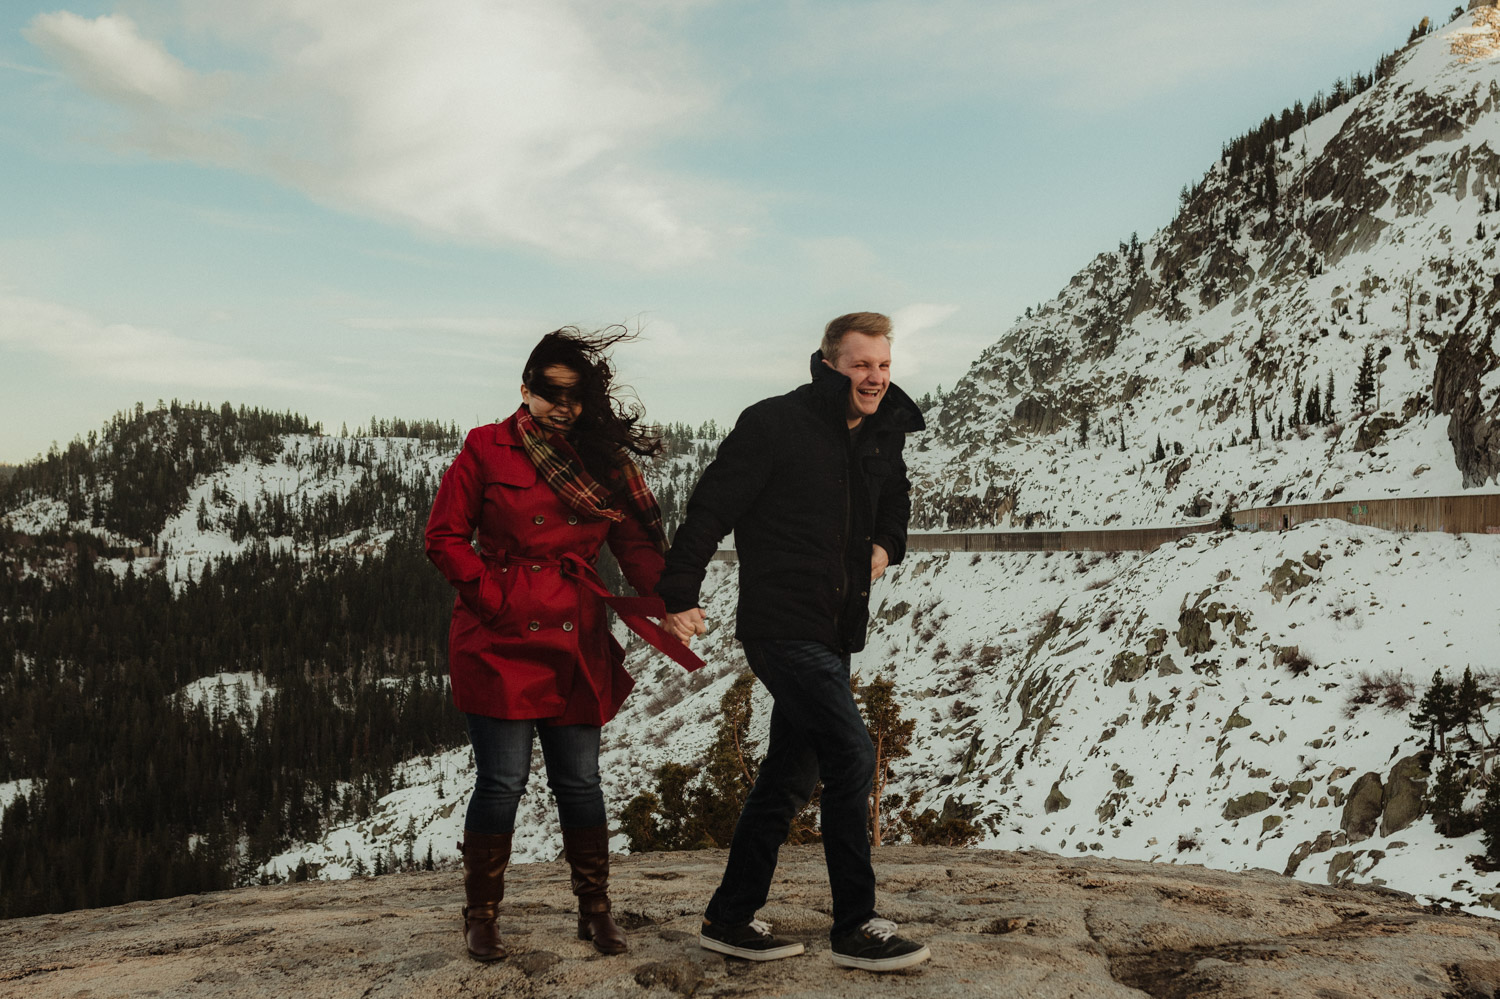 Windy engagement photo inspiration at Donner Pass photo